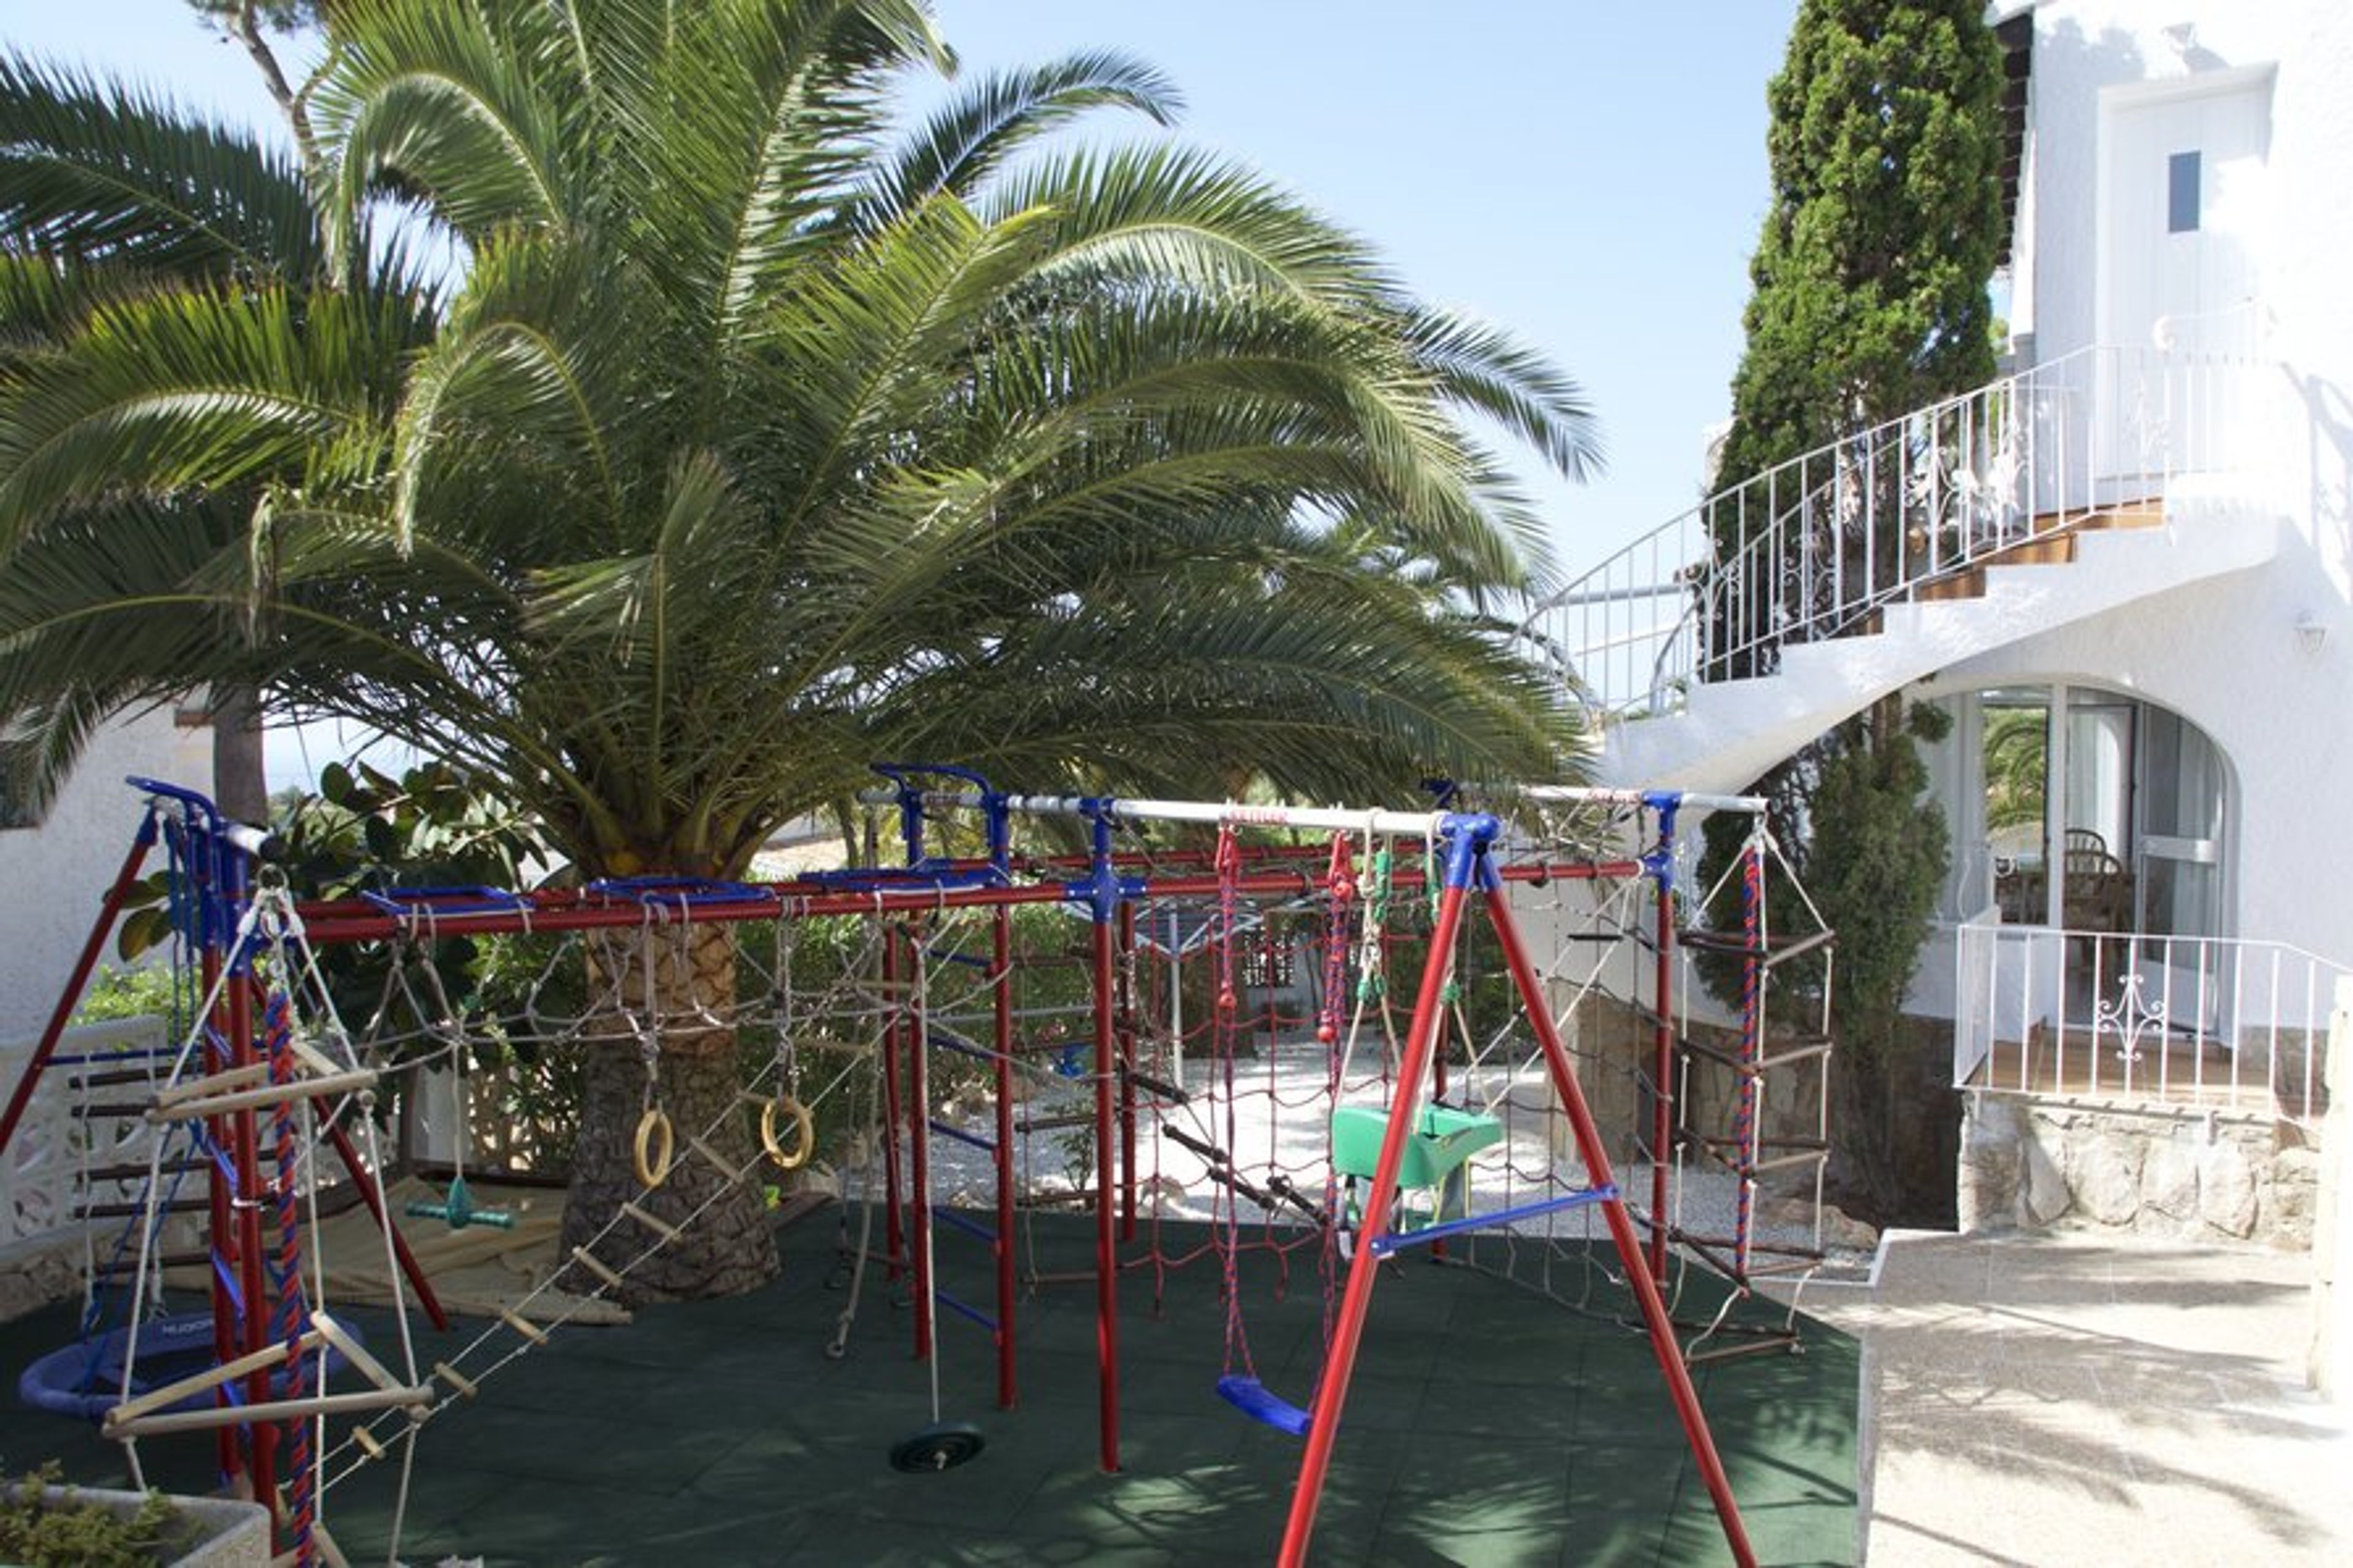 Private playground with a sand place
